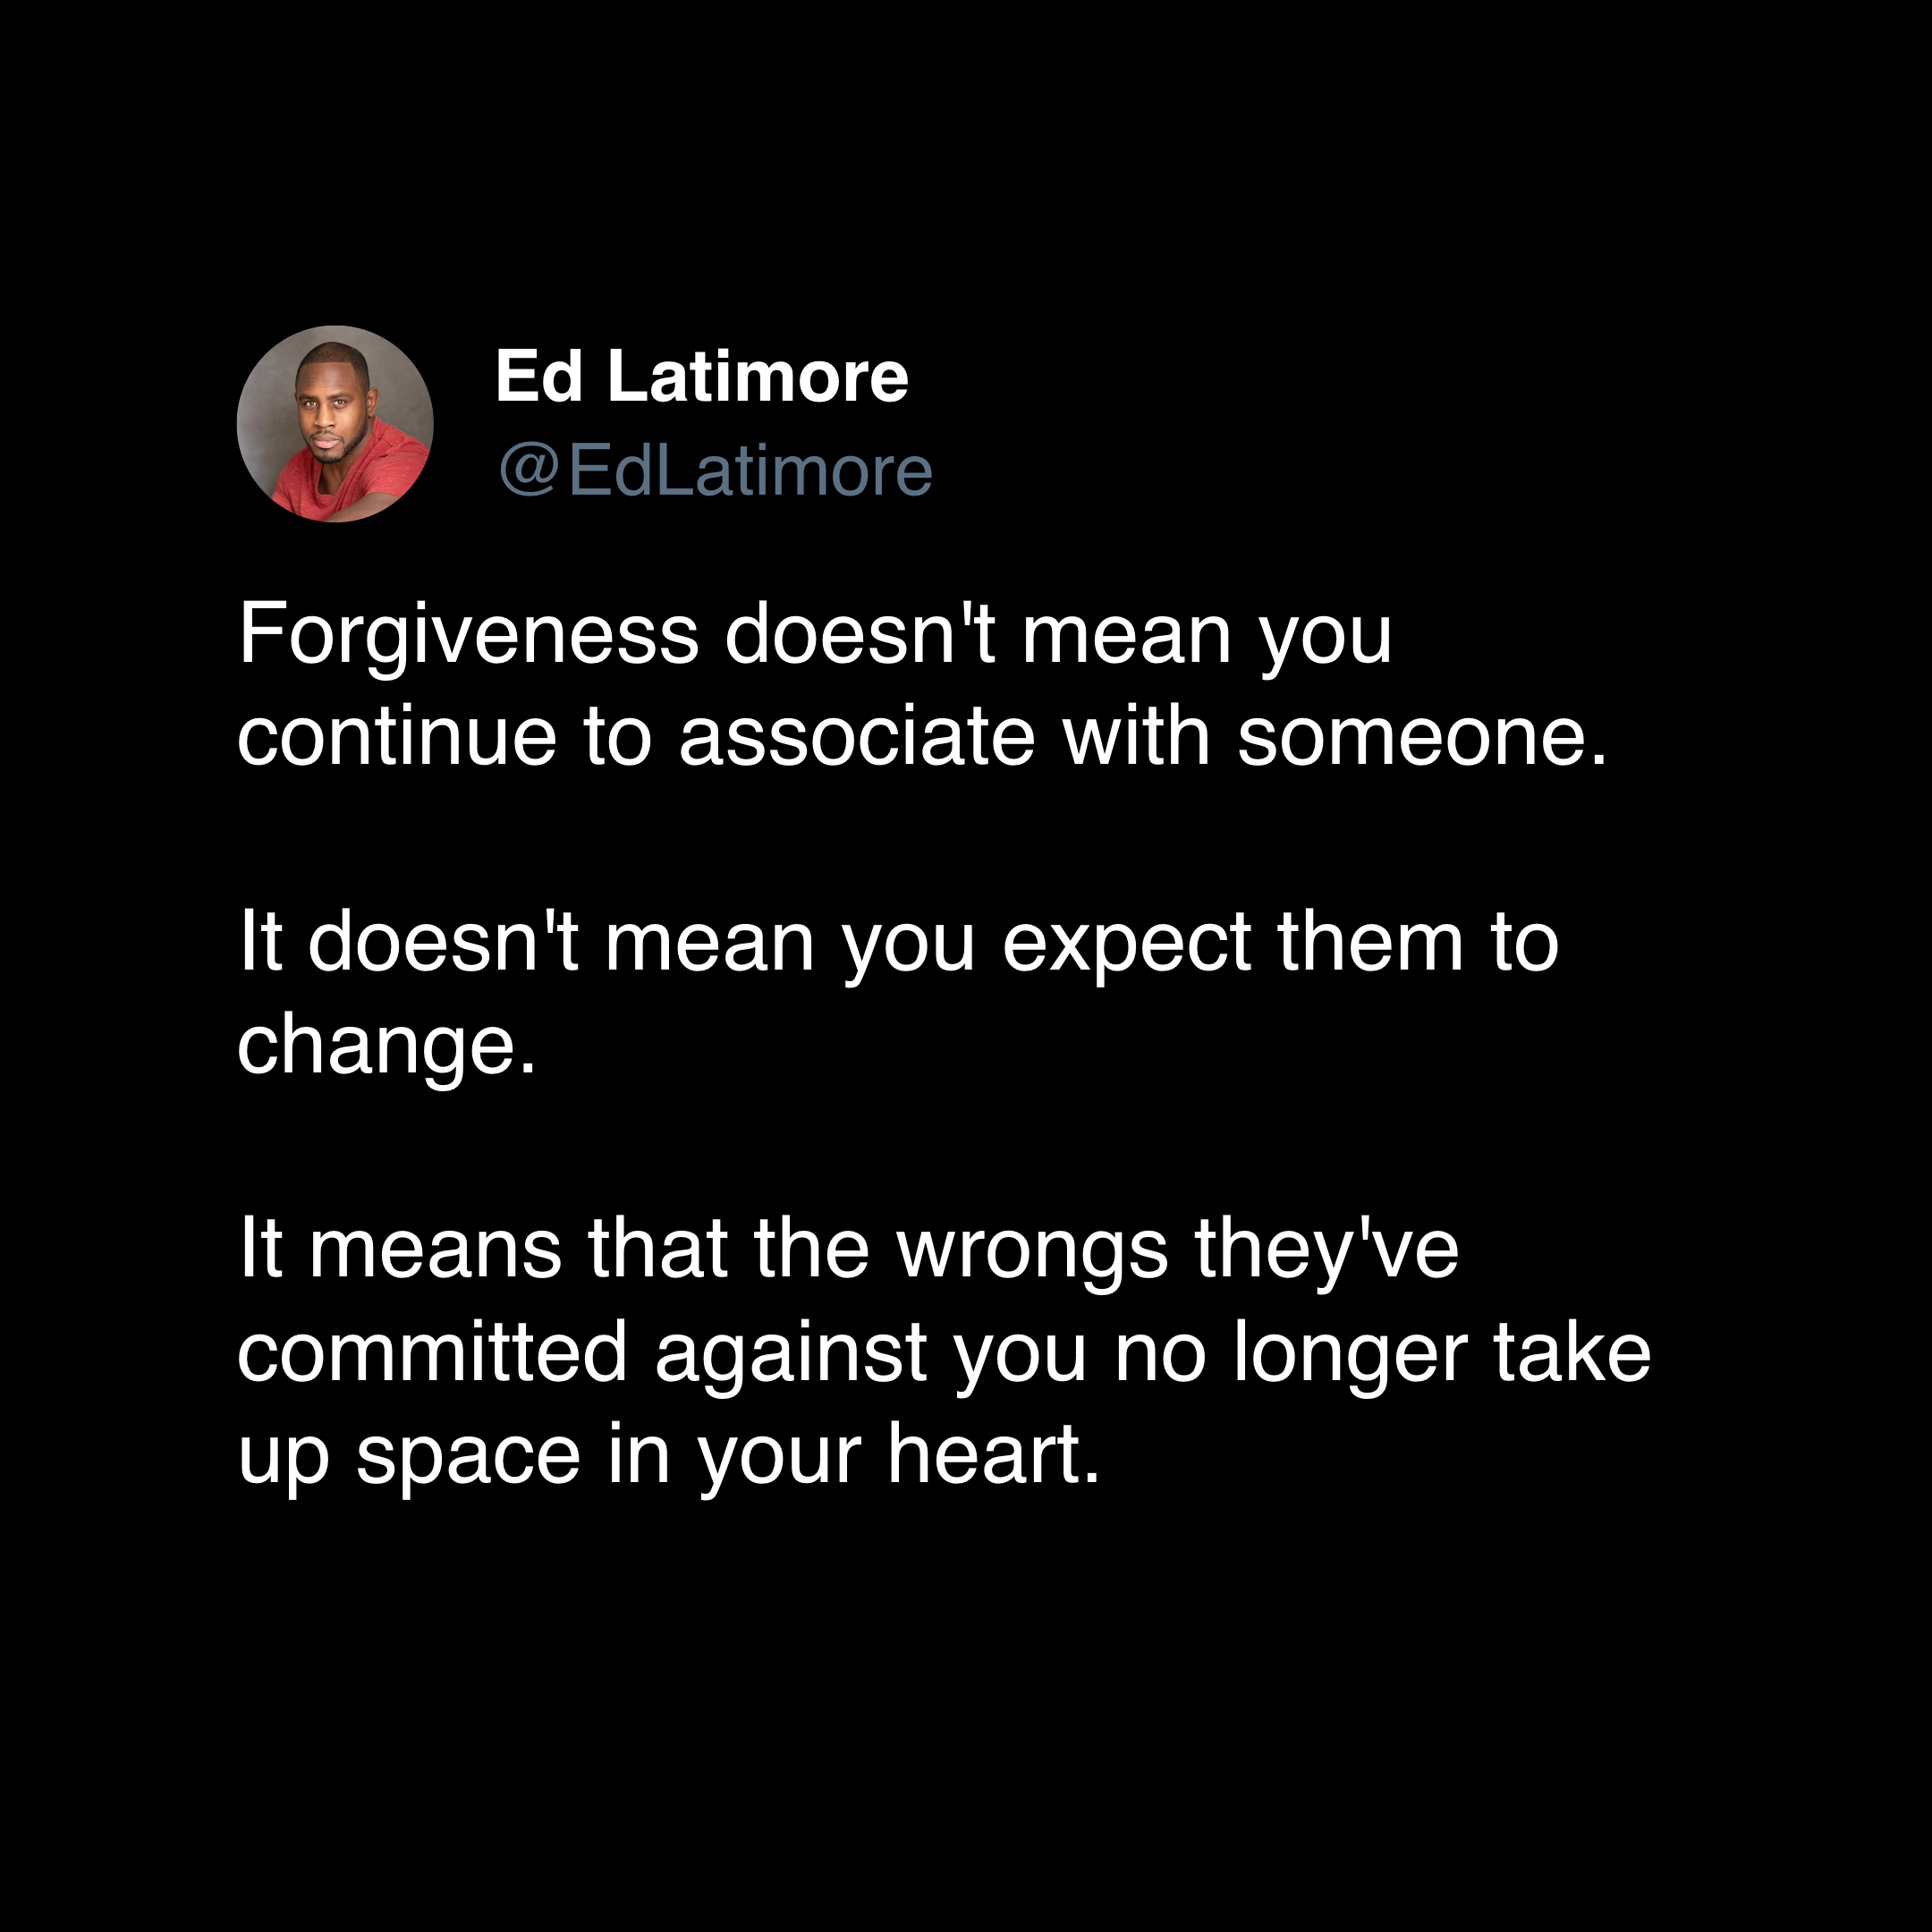 ed latimore forgiveness quotes "forgiveness doesn't mean continued association"